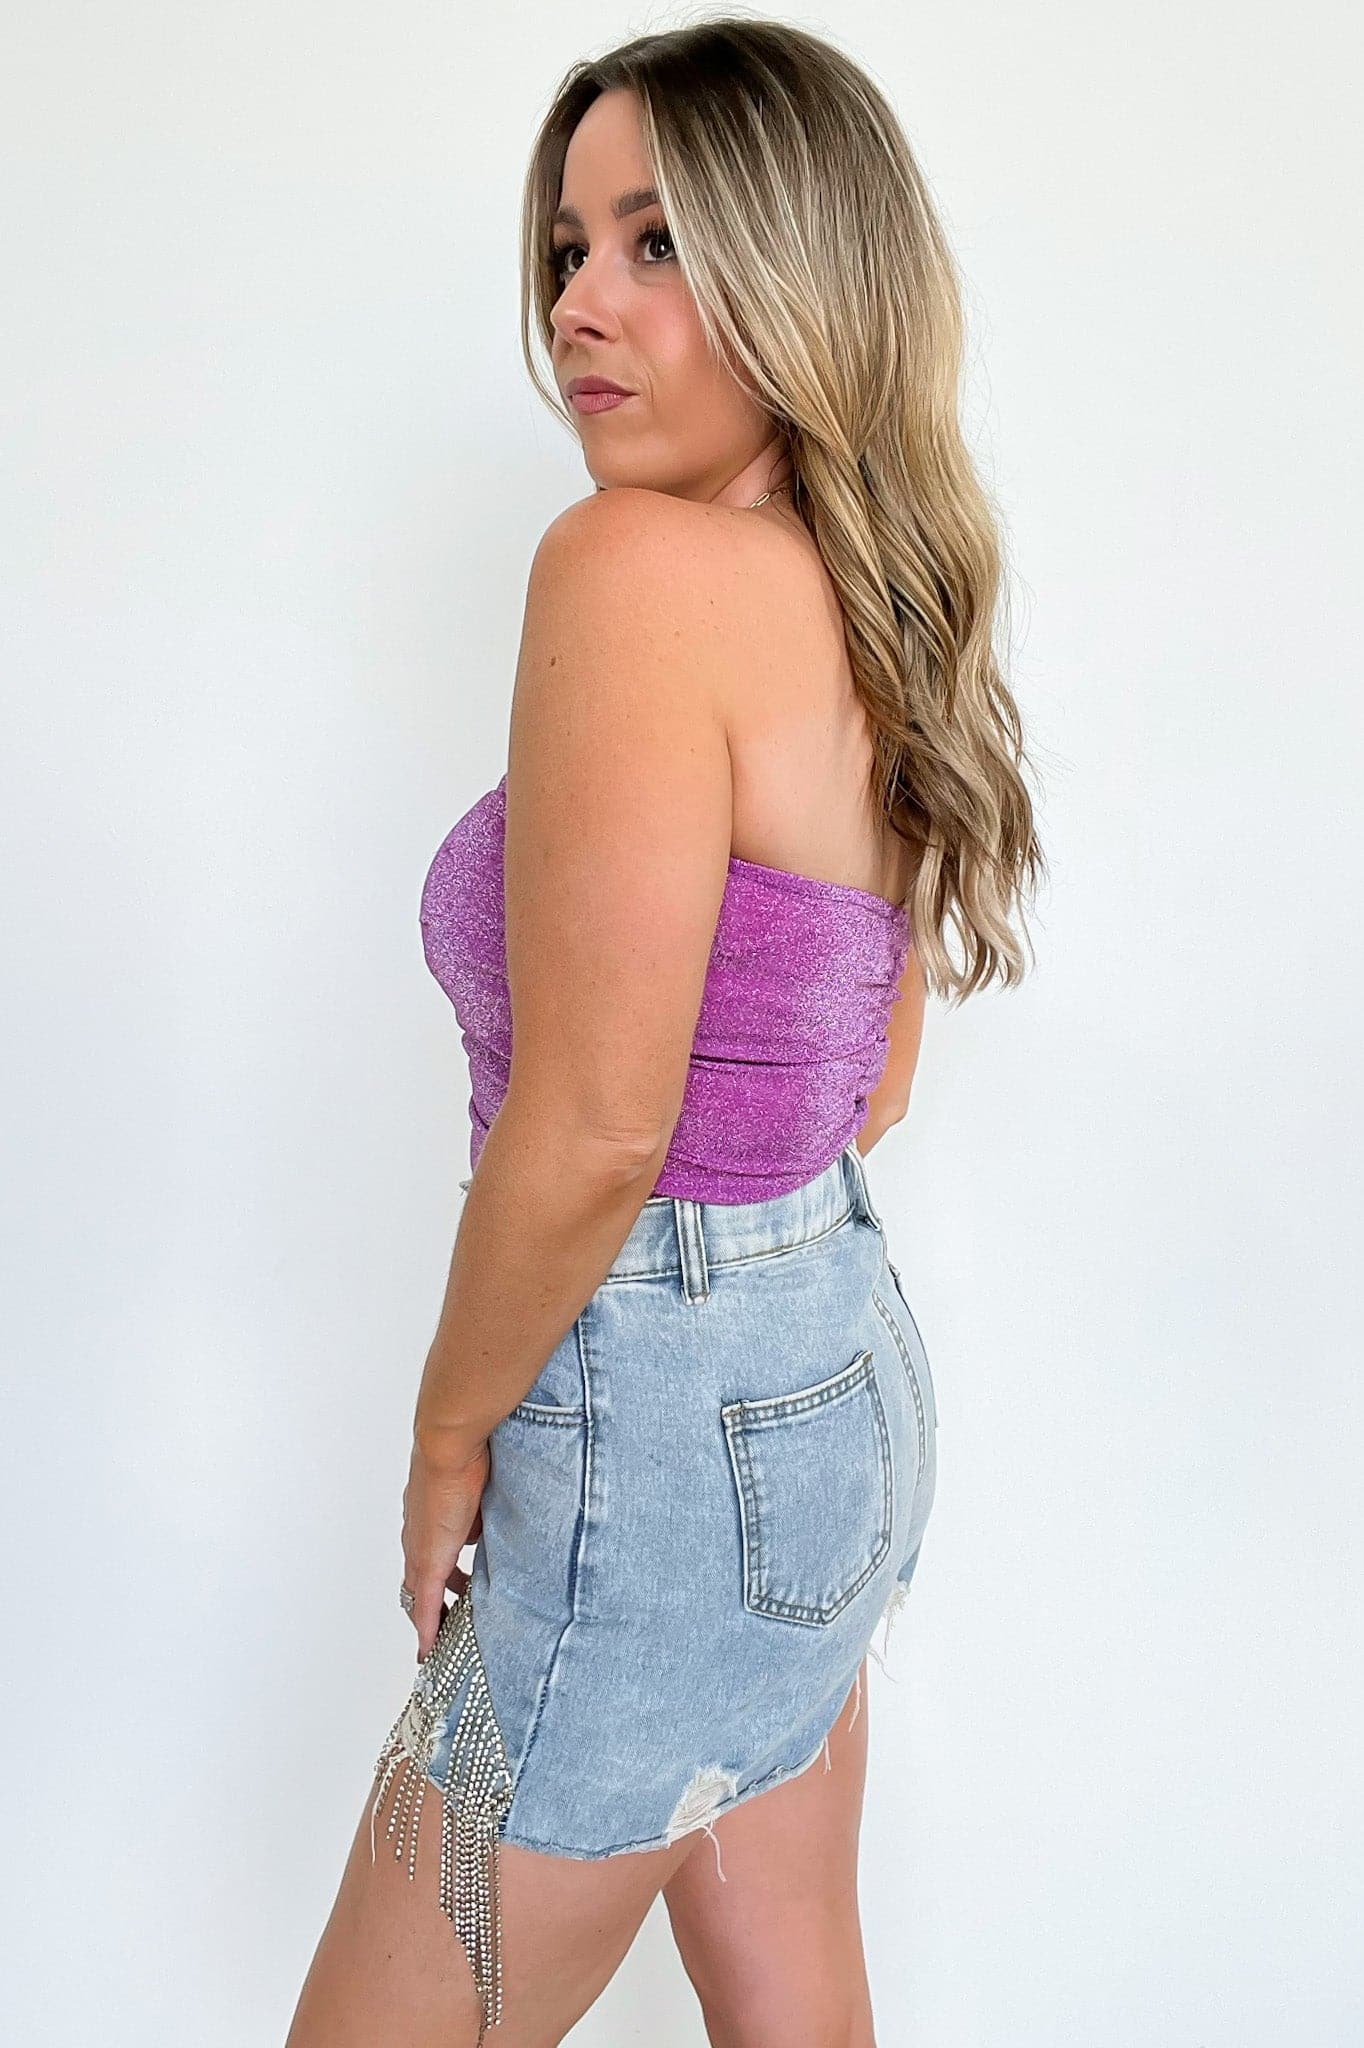  Sincerely Brilliant Ruched Strapless Bodysuit - FINAL SALE - Madison and Mallory